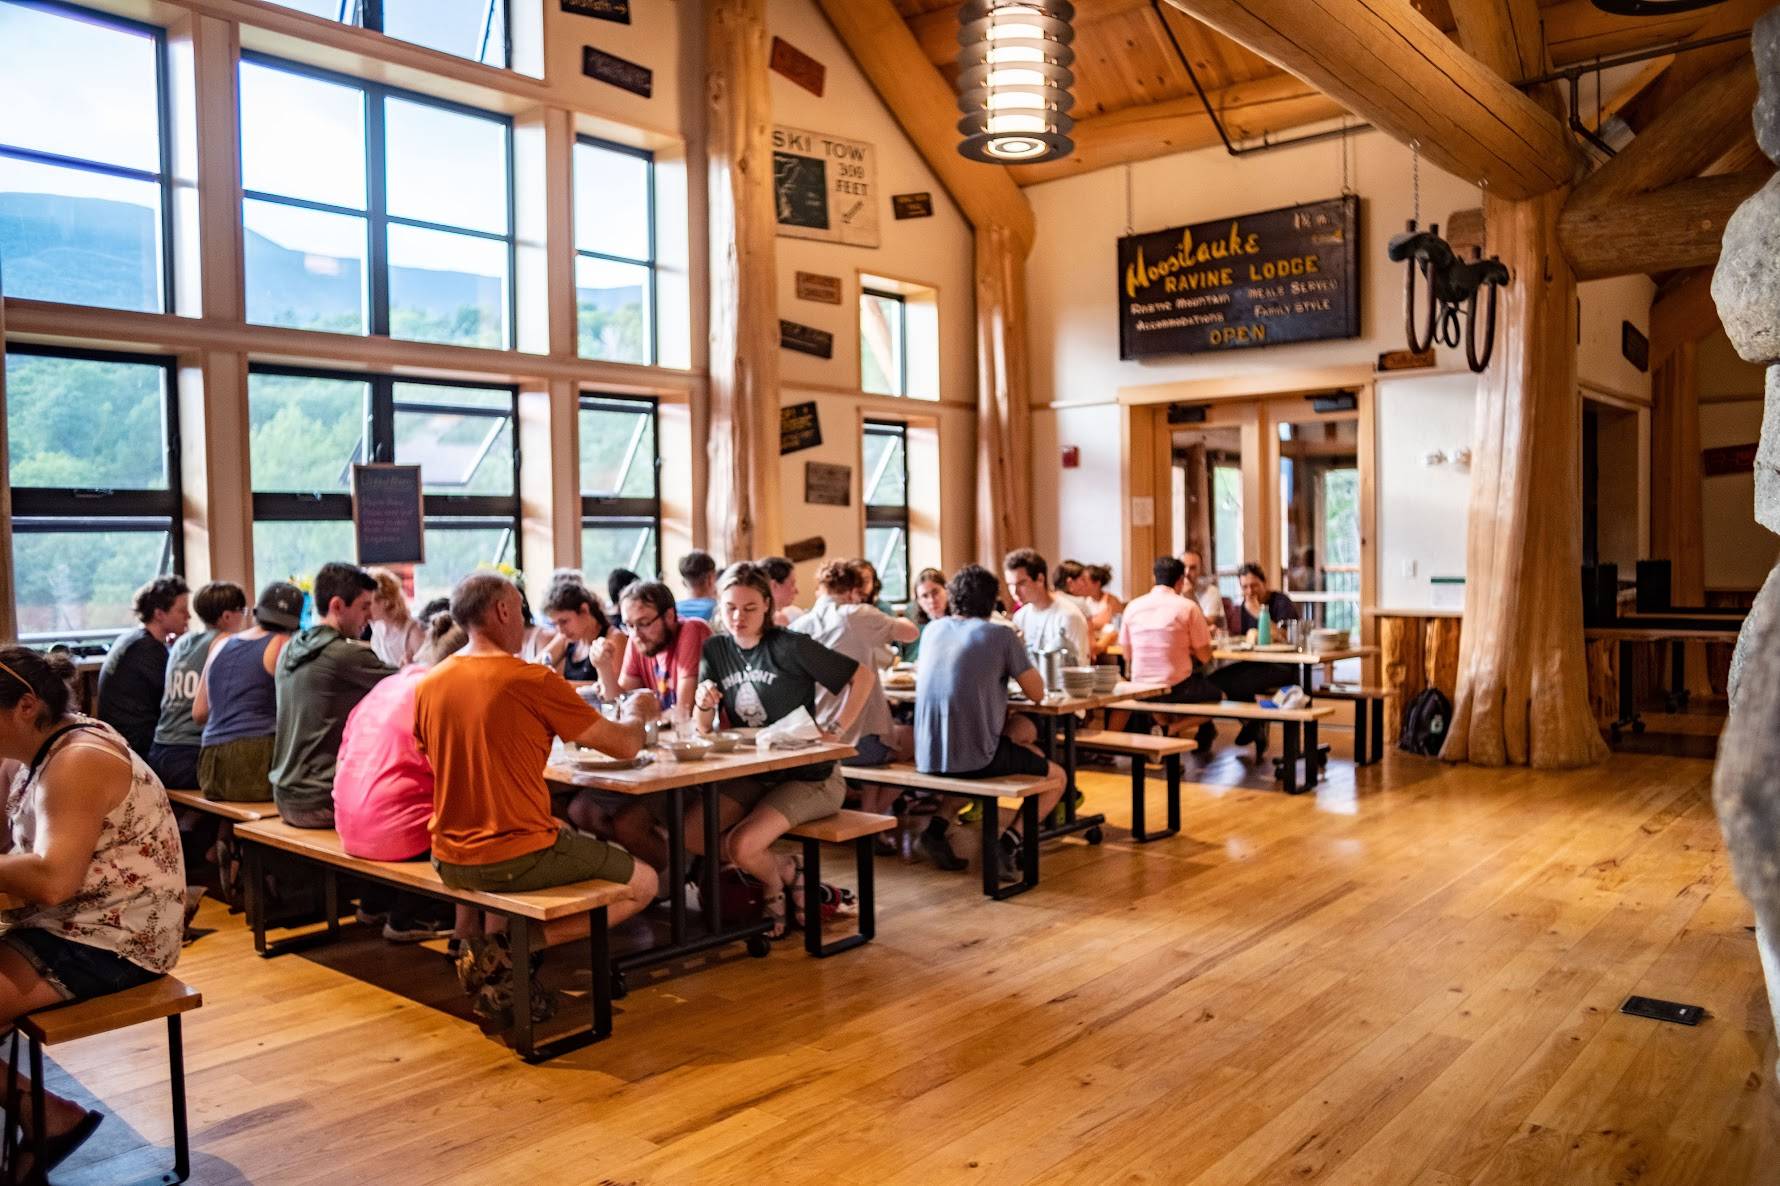 About 25 students and community members sit at tables in the main room of the Lodge during dinner service. 